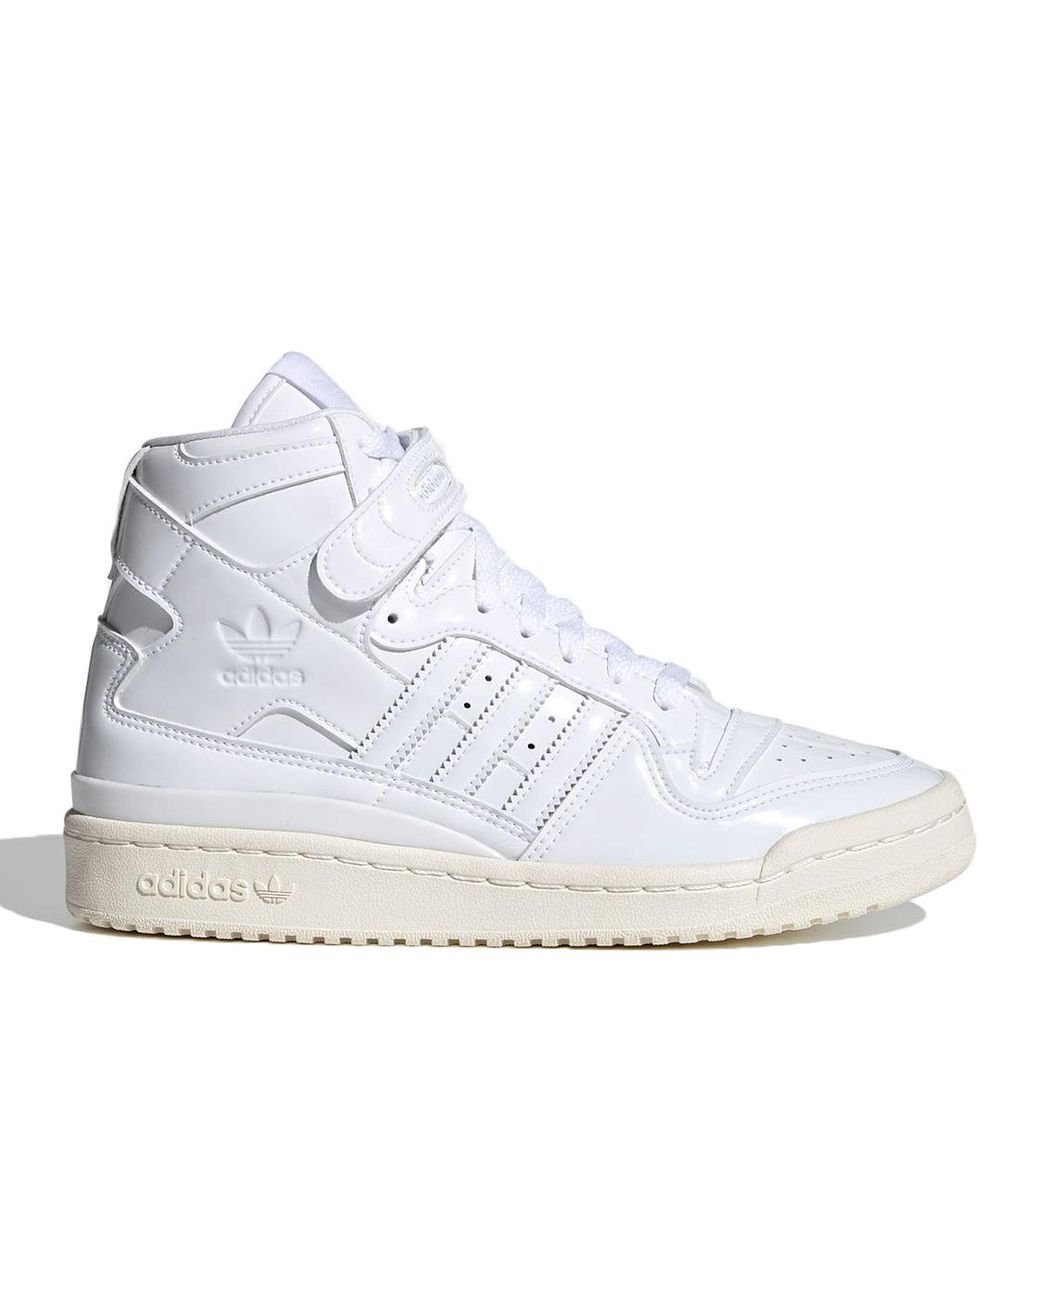 adidas Forum Mid Triple White Patent Leather (w) - Lyst